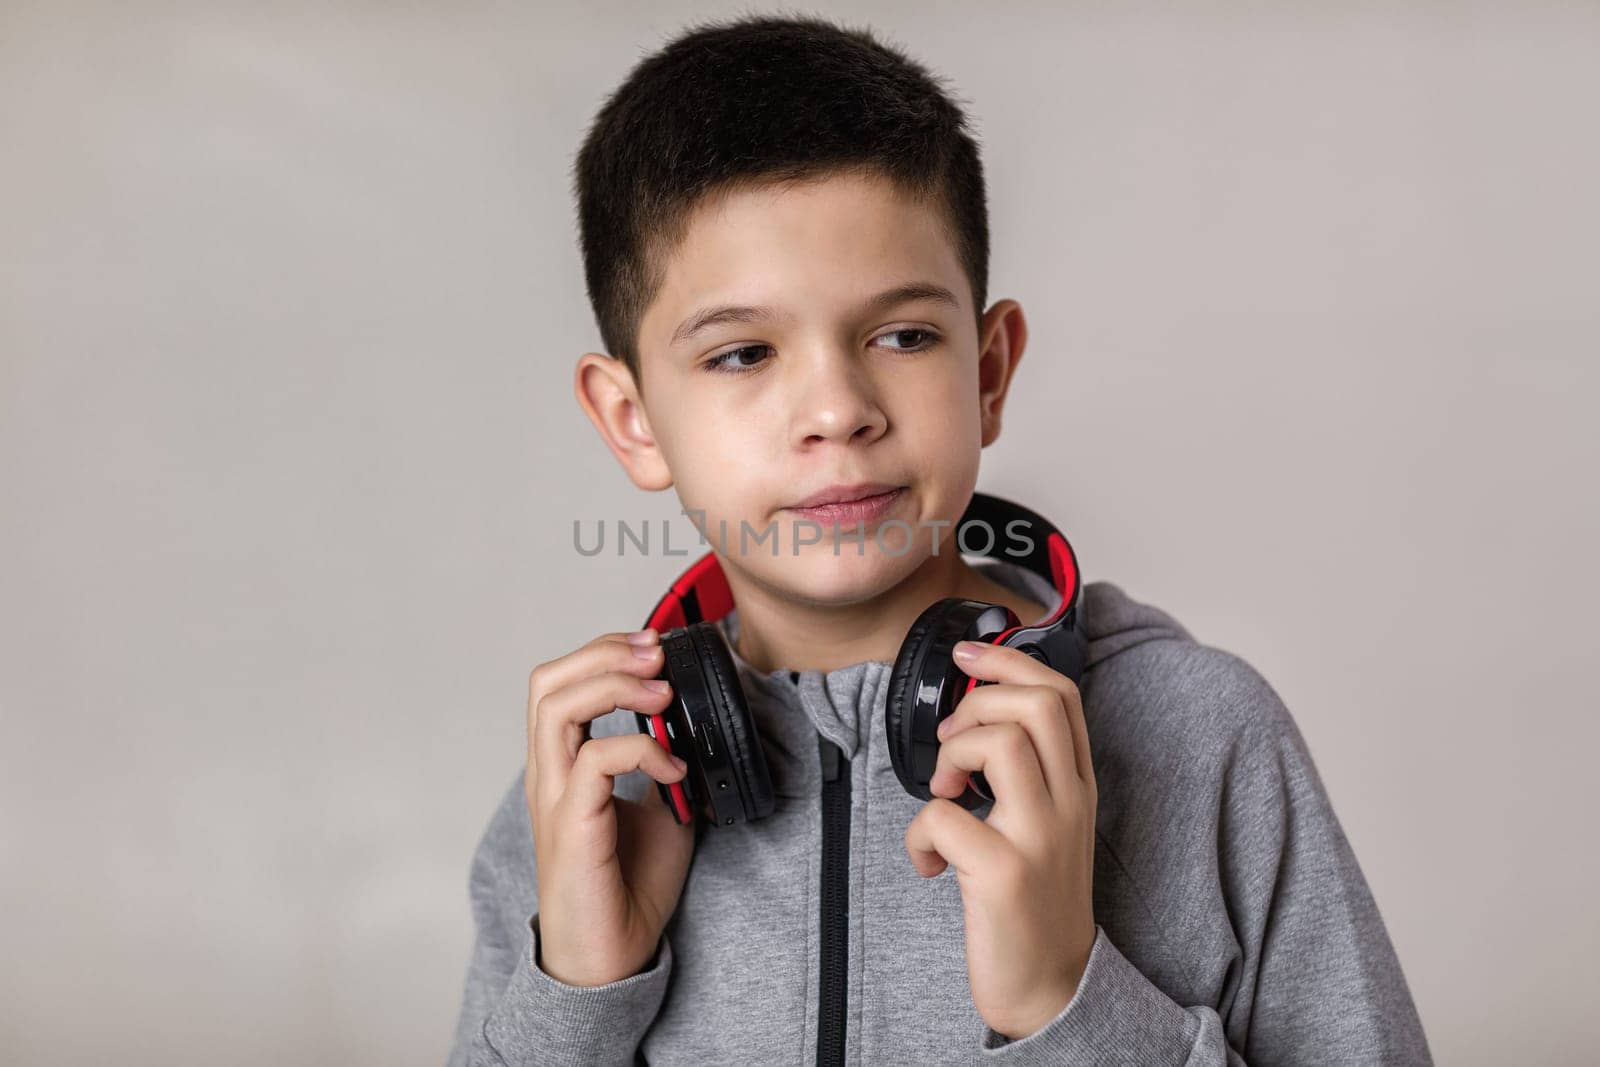 Happy child boy with headphones looking at camera over gray background.